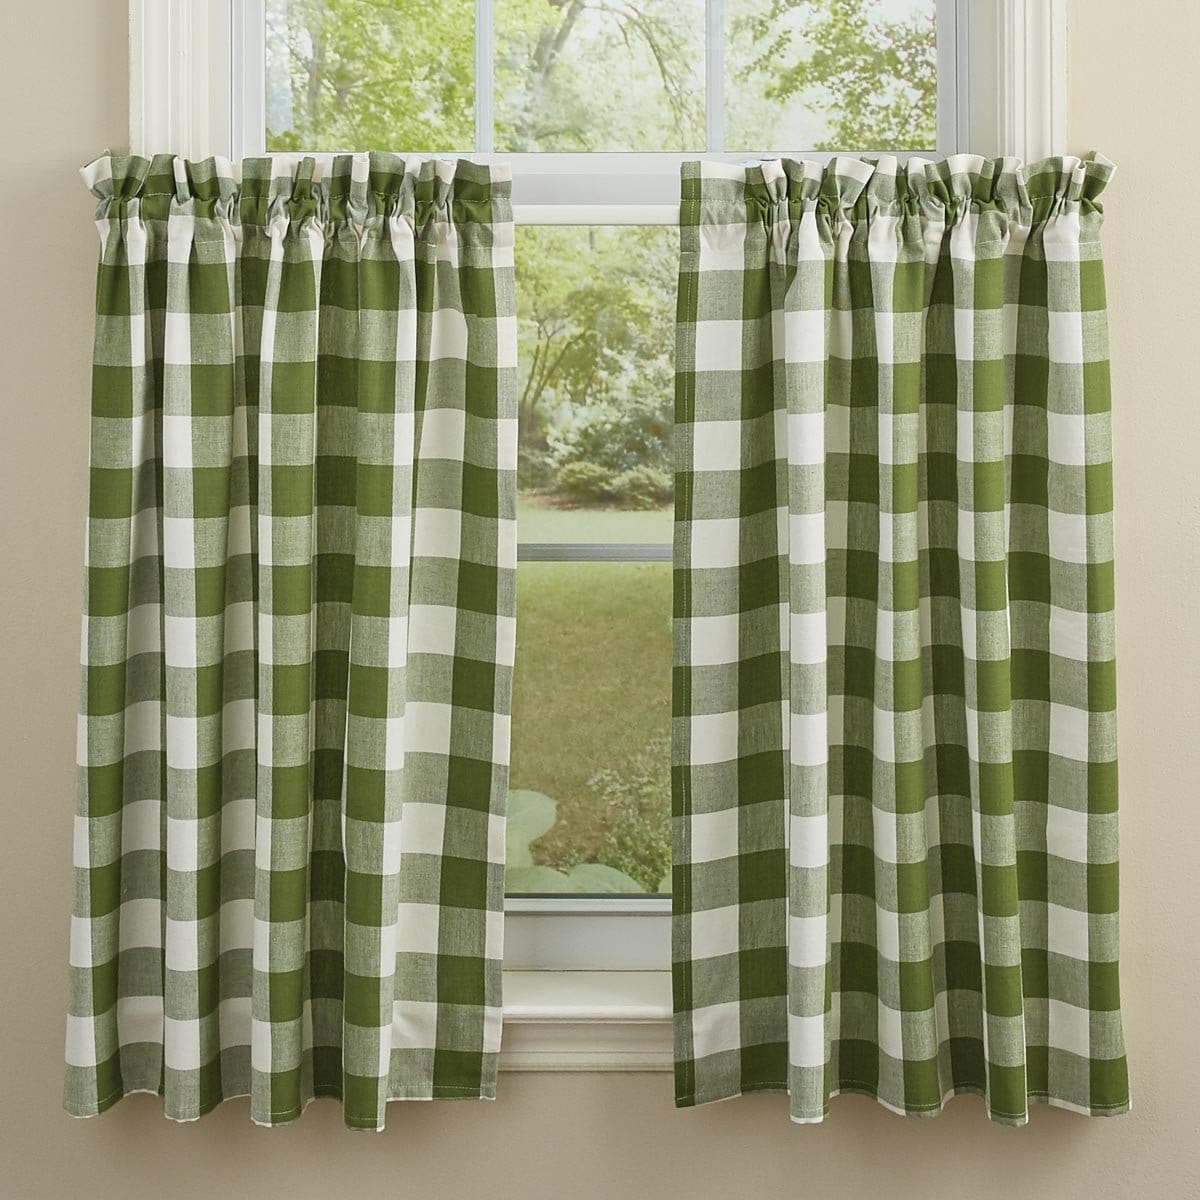 Wicklow Check in Sage Green Tier Pair 36" Long Unlined-Park Designs-The Village Merchant